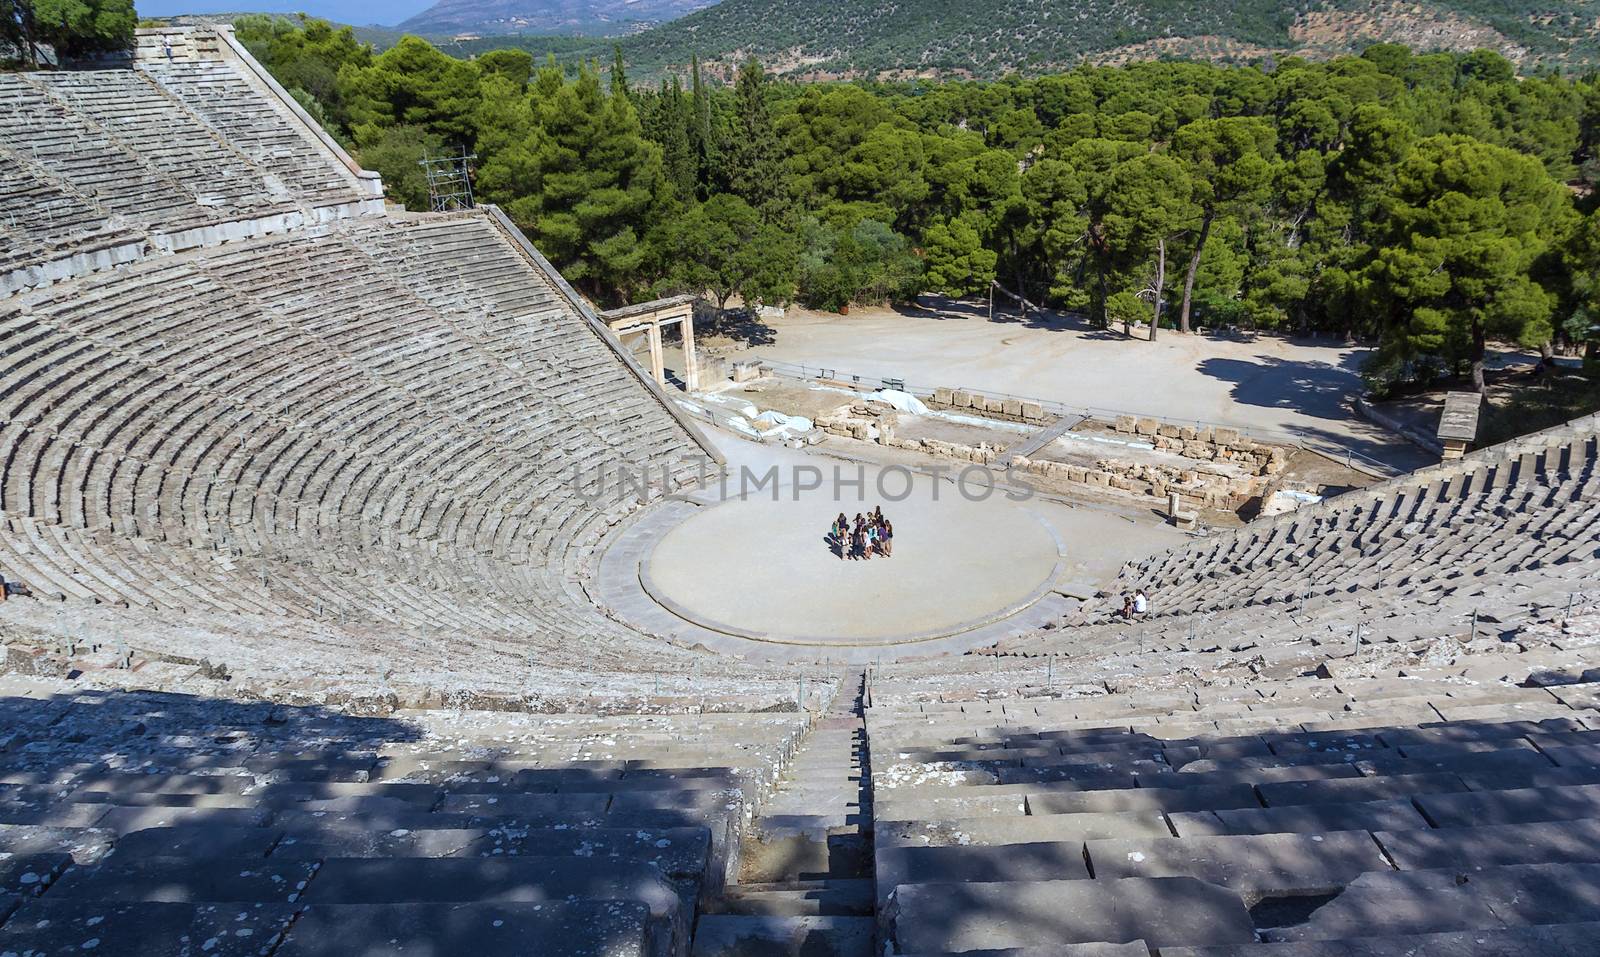 Epidaurus Theater. The theater was designed by Polykleitos the Younger in the 4th century BC.